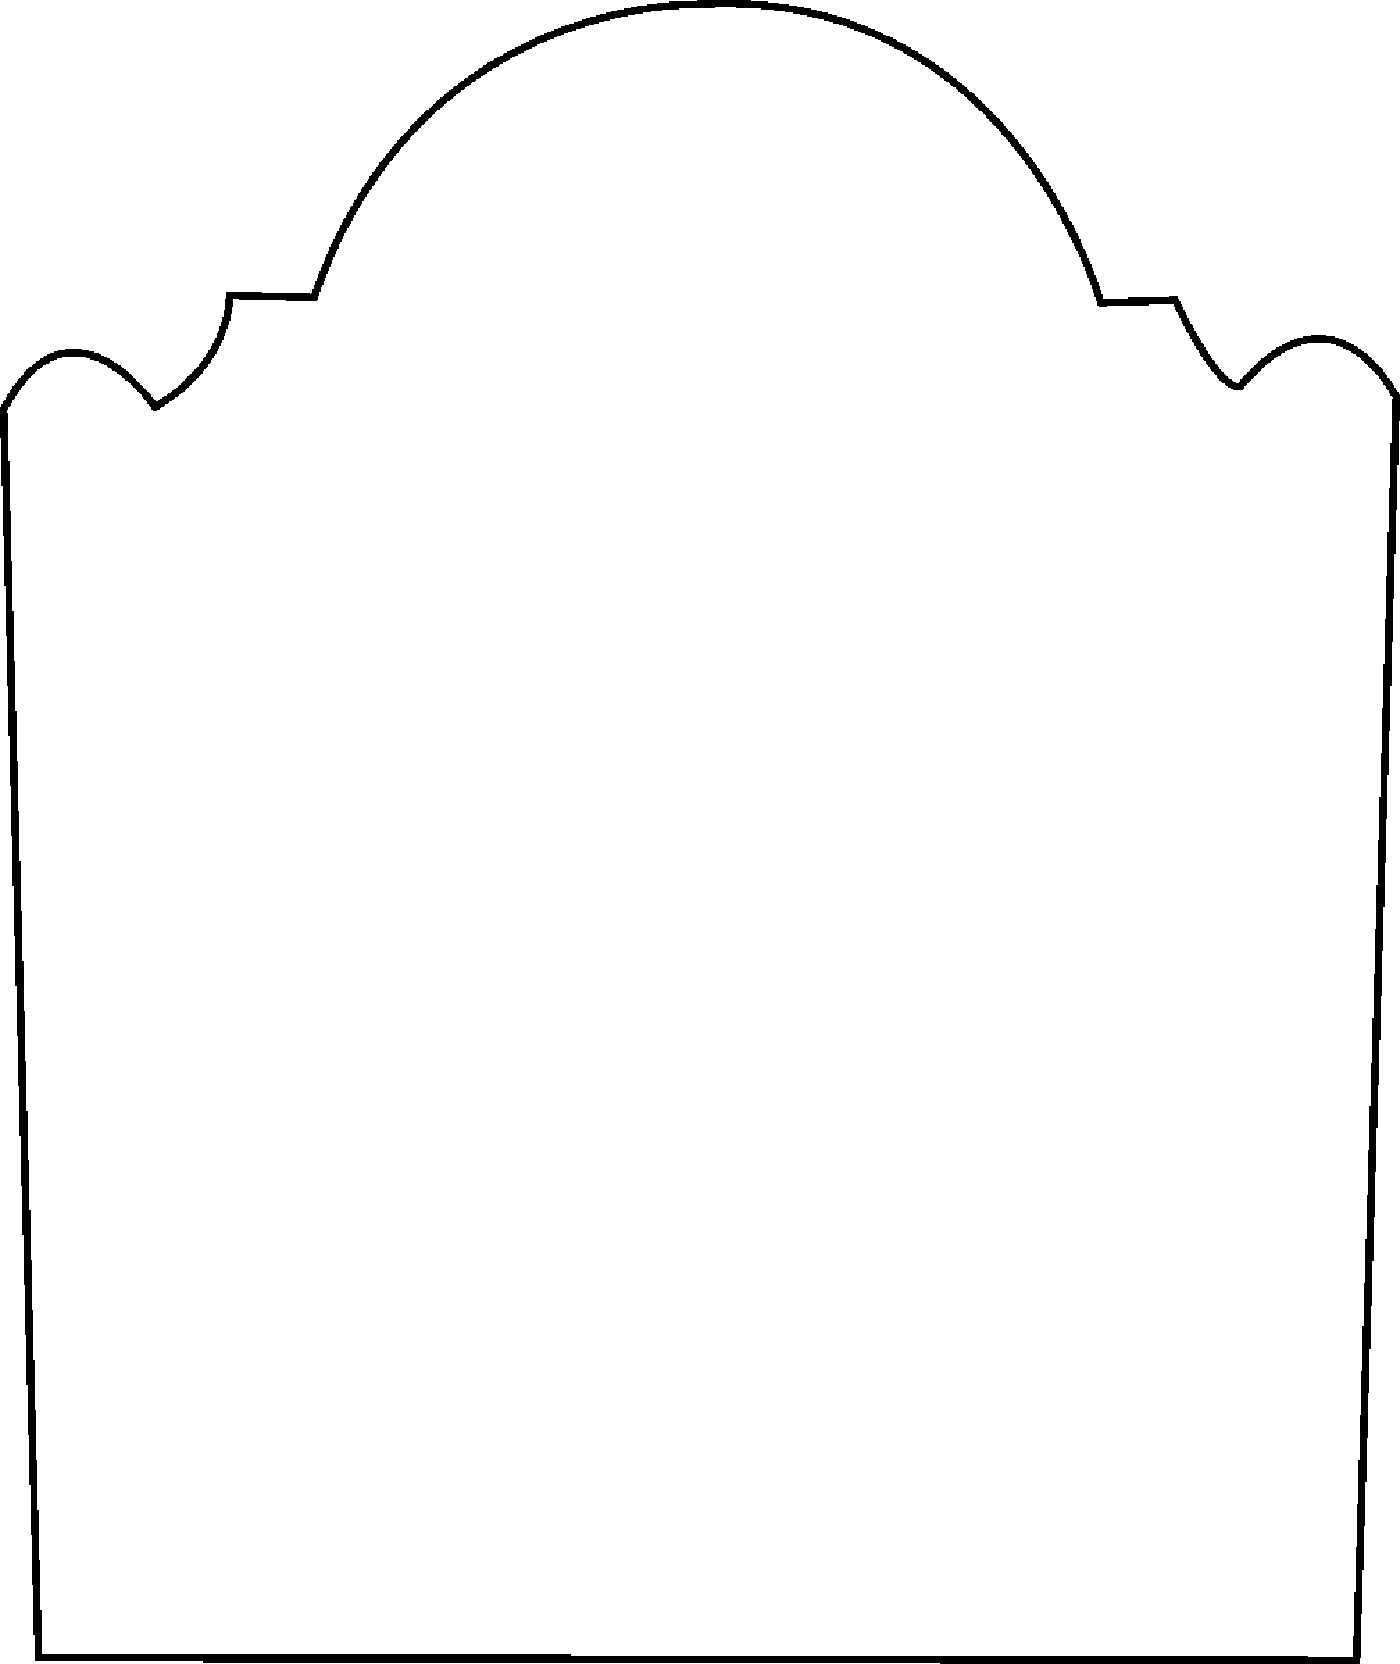 Free Blank Tombstone Template, Download Free Clip Art, Free